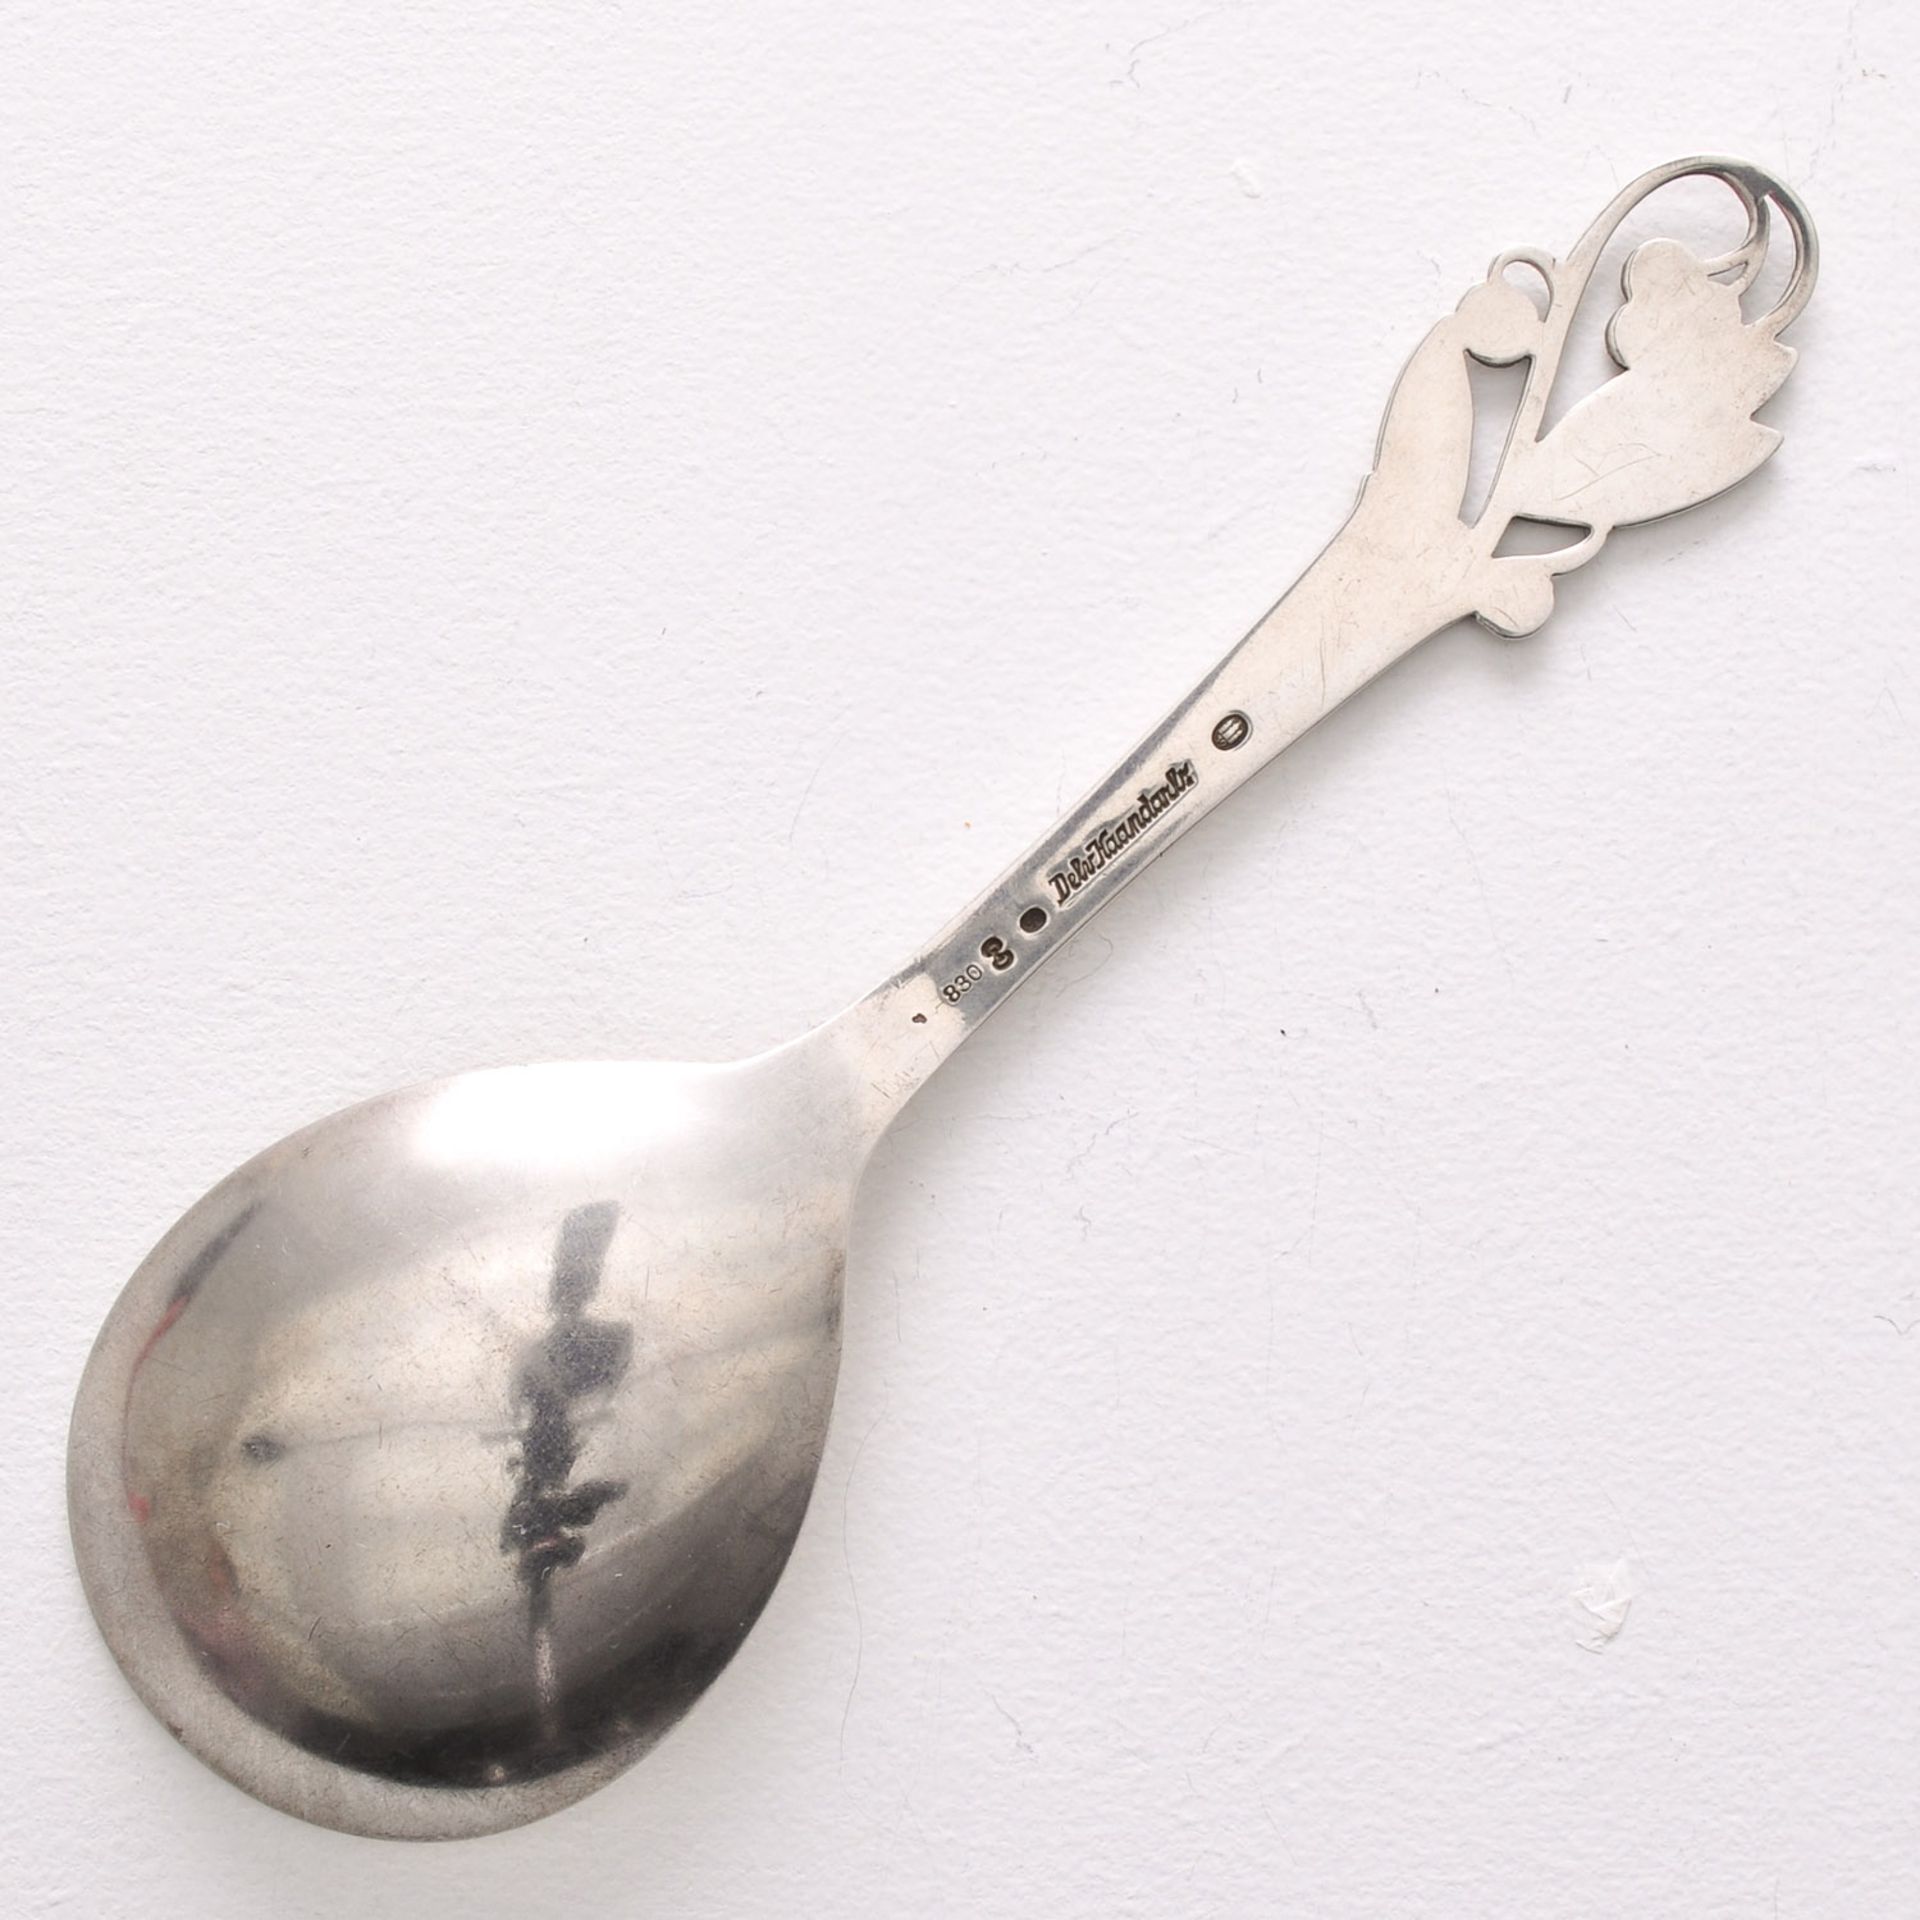 A Carl M. Cohr Spoon - Image 2 of 2